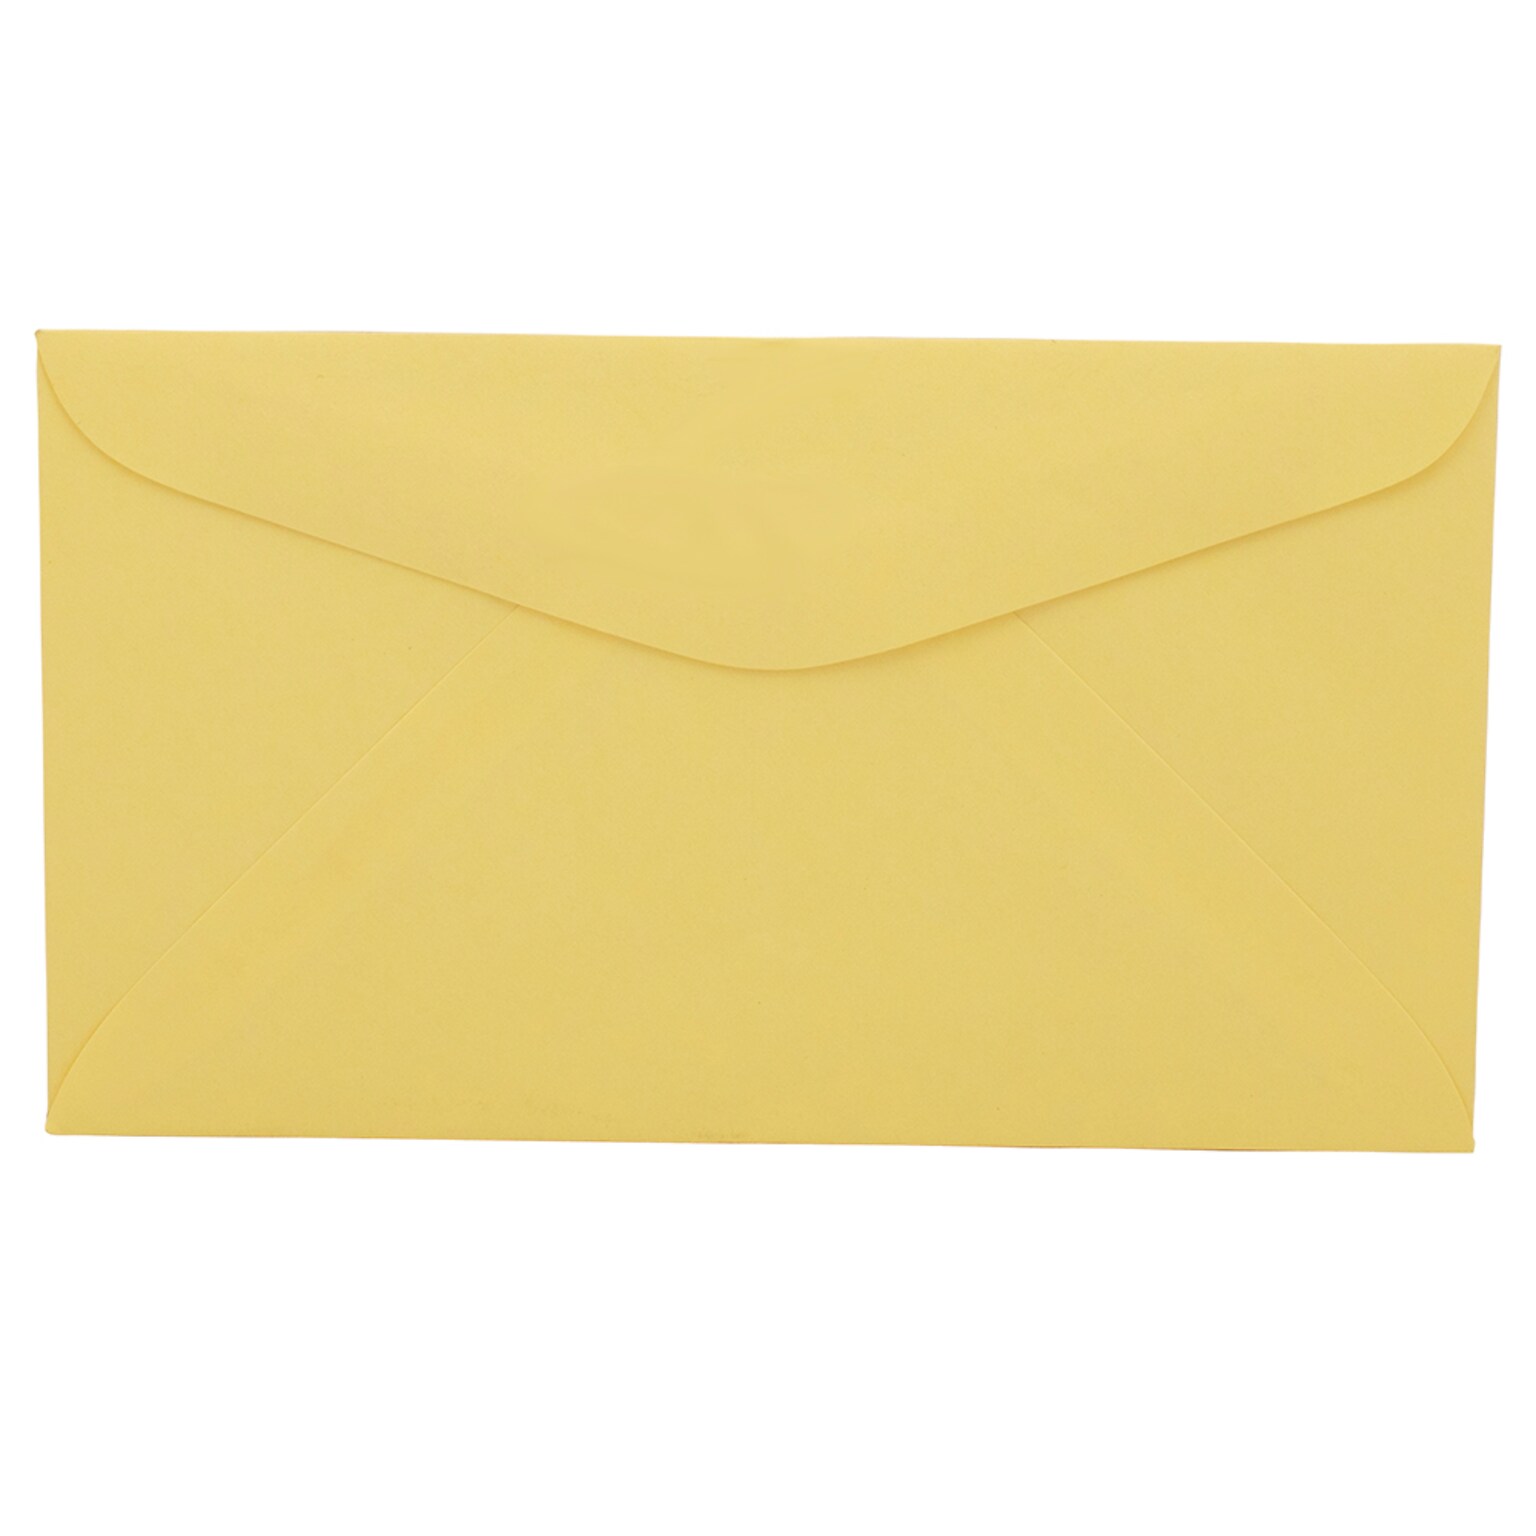 JAM Paper #6 3/4 Business Envelope, 3 5/8 x 6 1/2, Cary Yellow, 50/Pack (357617061C)